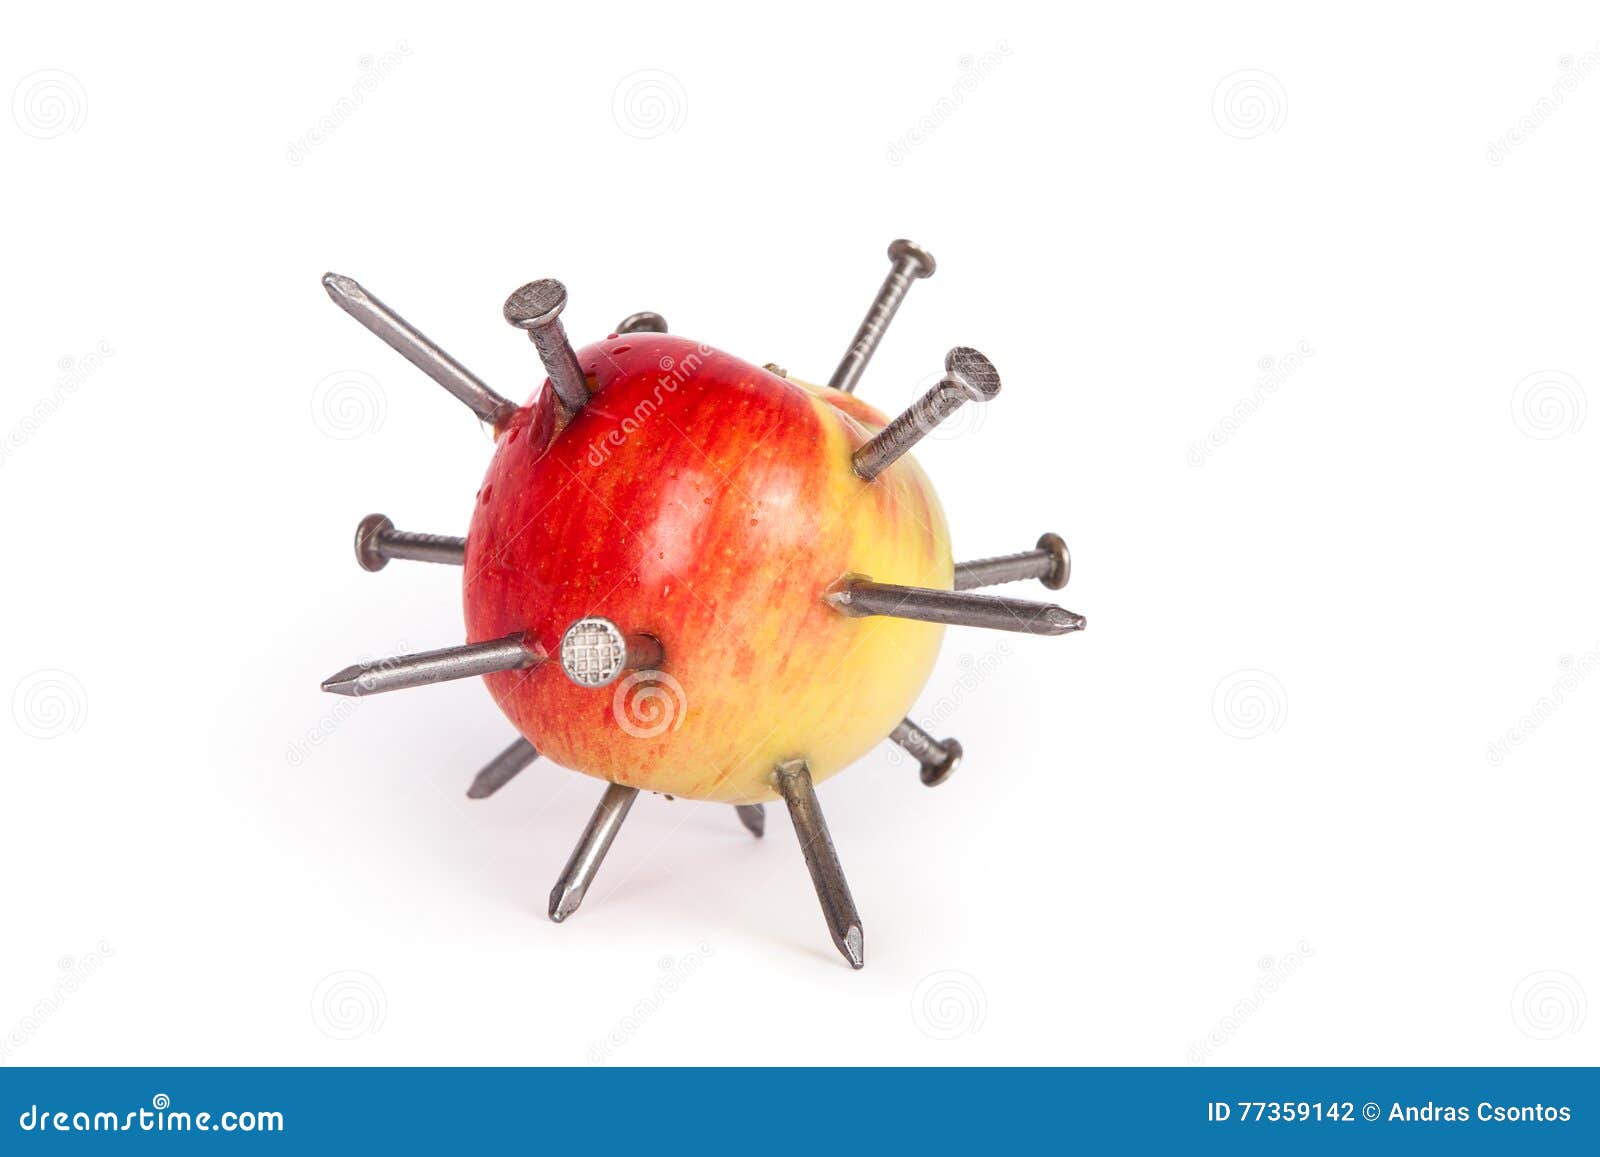 Apple stuck with iron nails. Apple stuck with lots of iron nails on white background